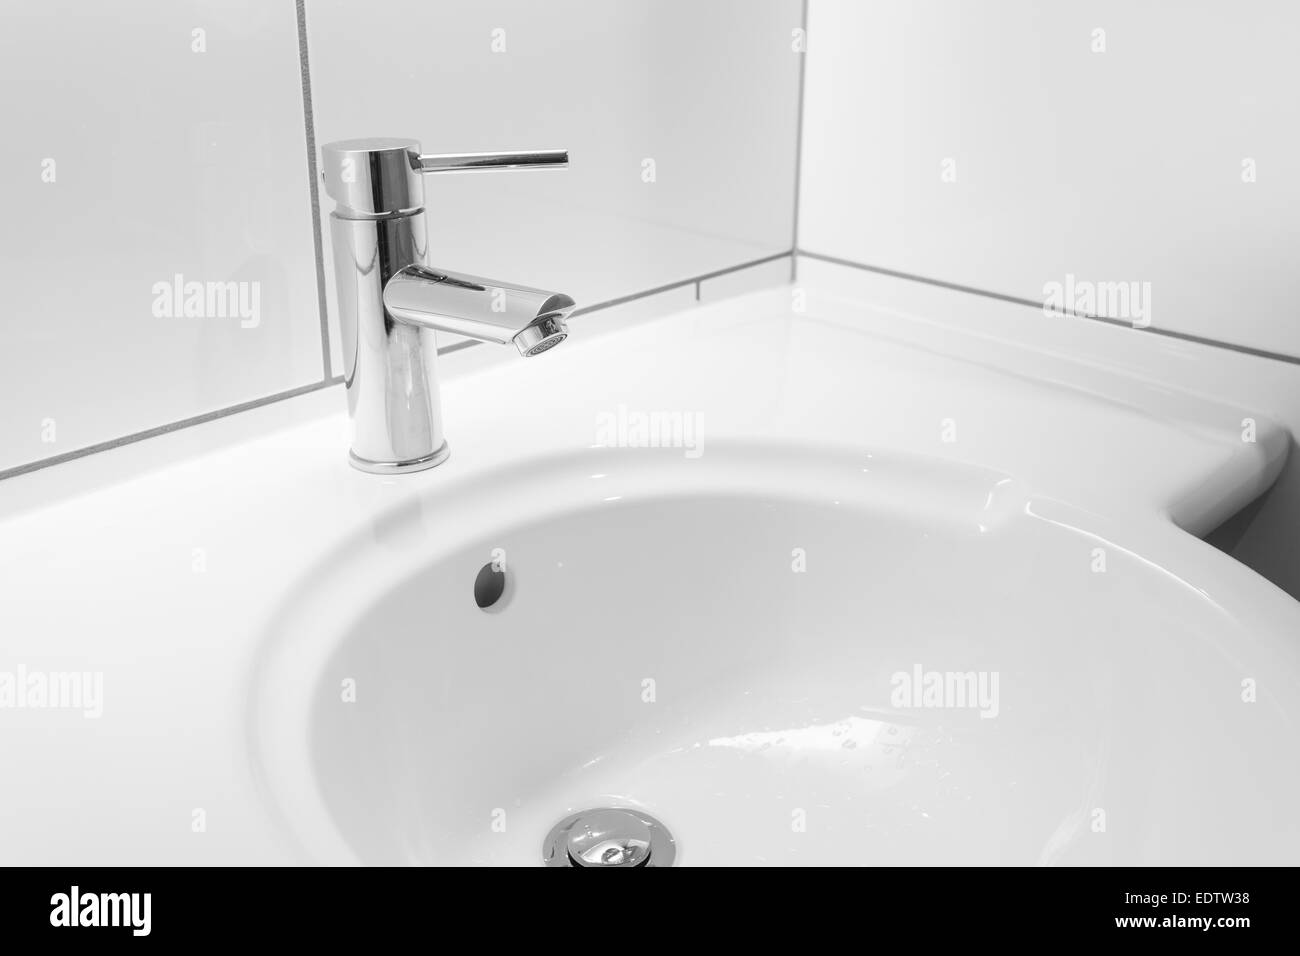 Faucet and white basin in a bathroom Stock Photo